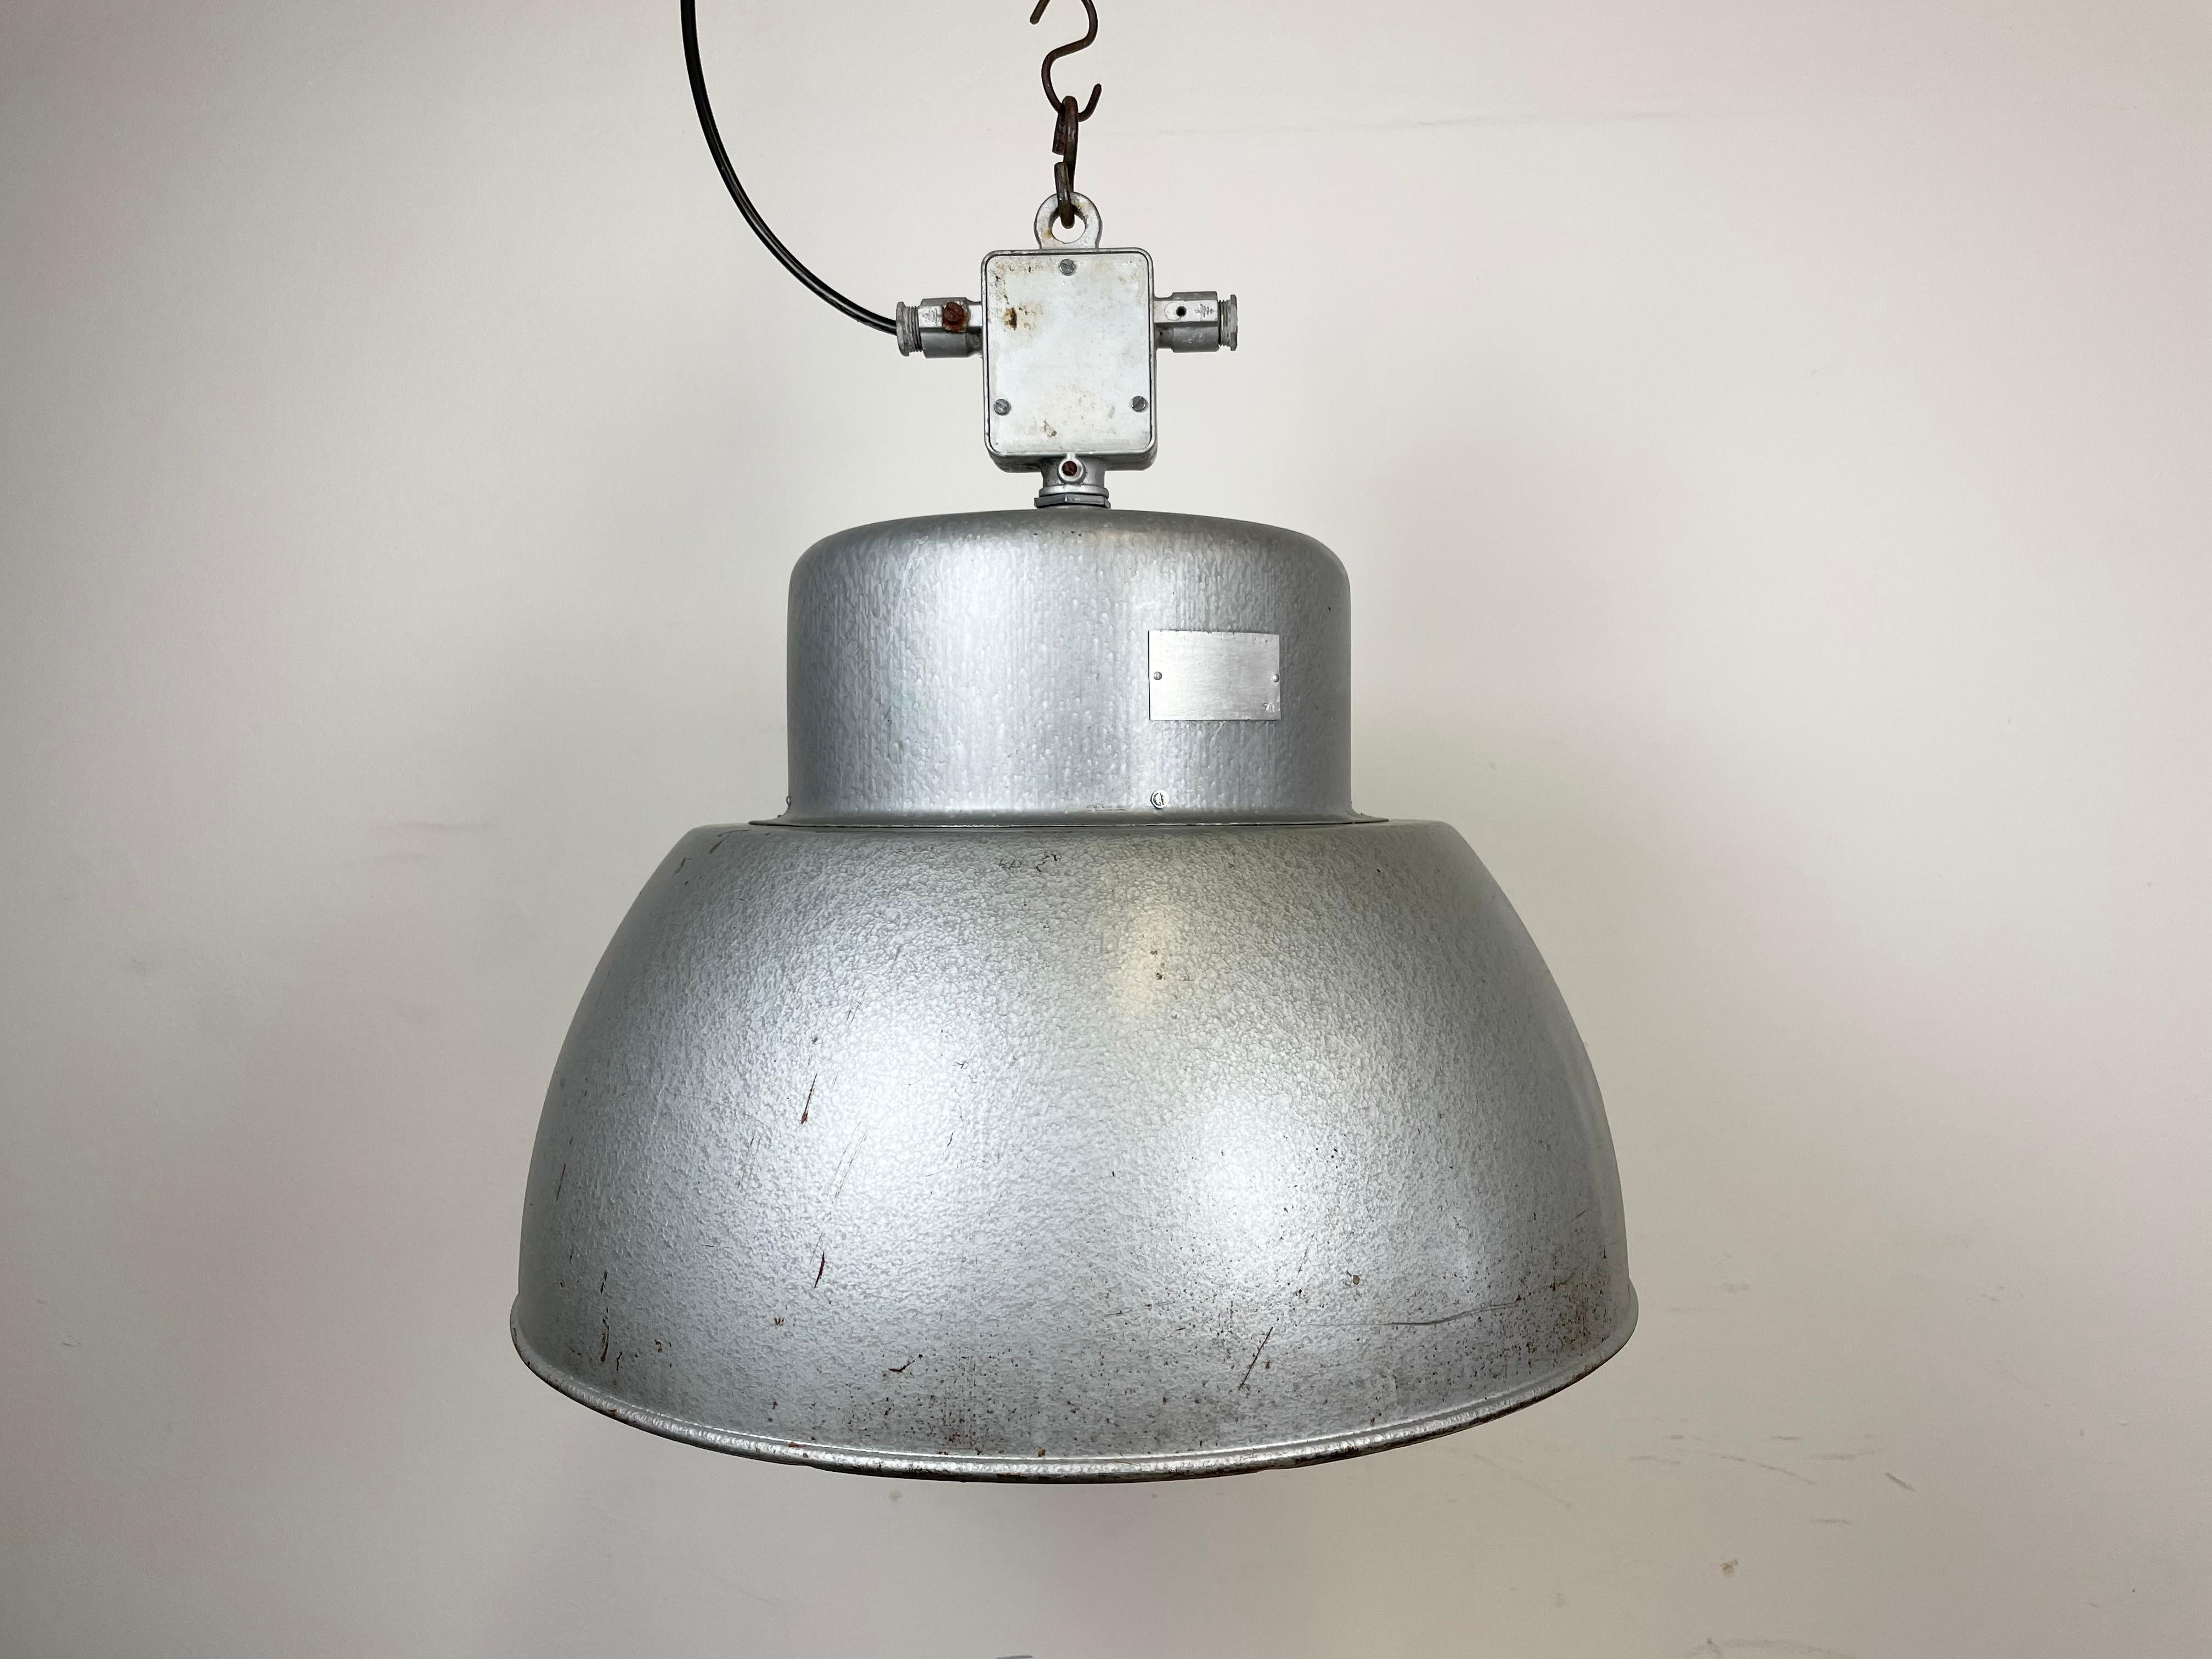 Vintage industrial hanging lamp manufactured in 1970s by MESKO in Skarzysko-Kamienna in Poland. It features a hammerpaint iron body and a cast aluminium top. The porcelain socket requires E 27/E26 light bulbs. New wire. The weight of the lamp is 5